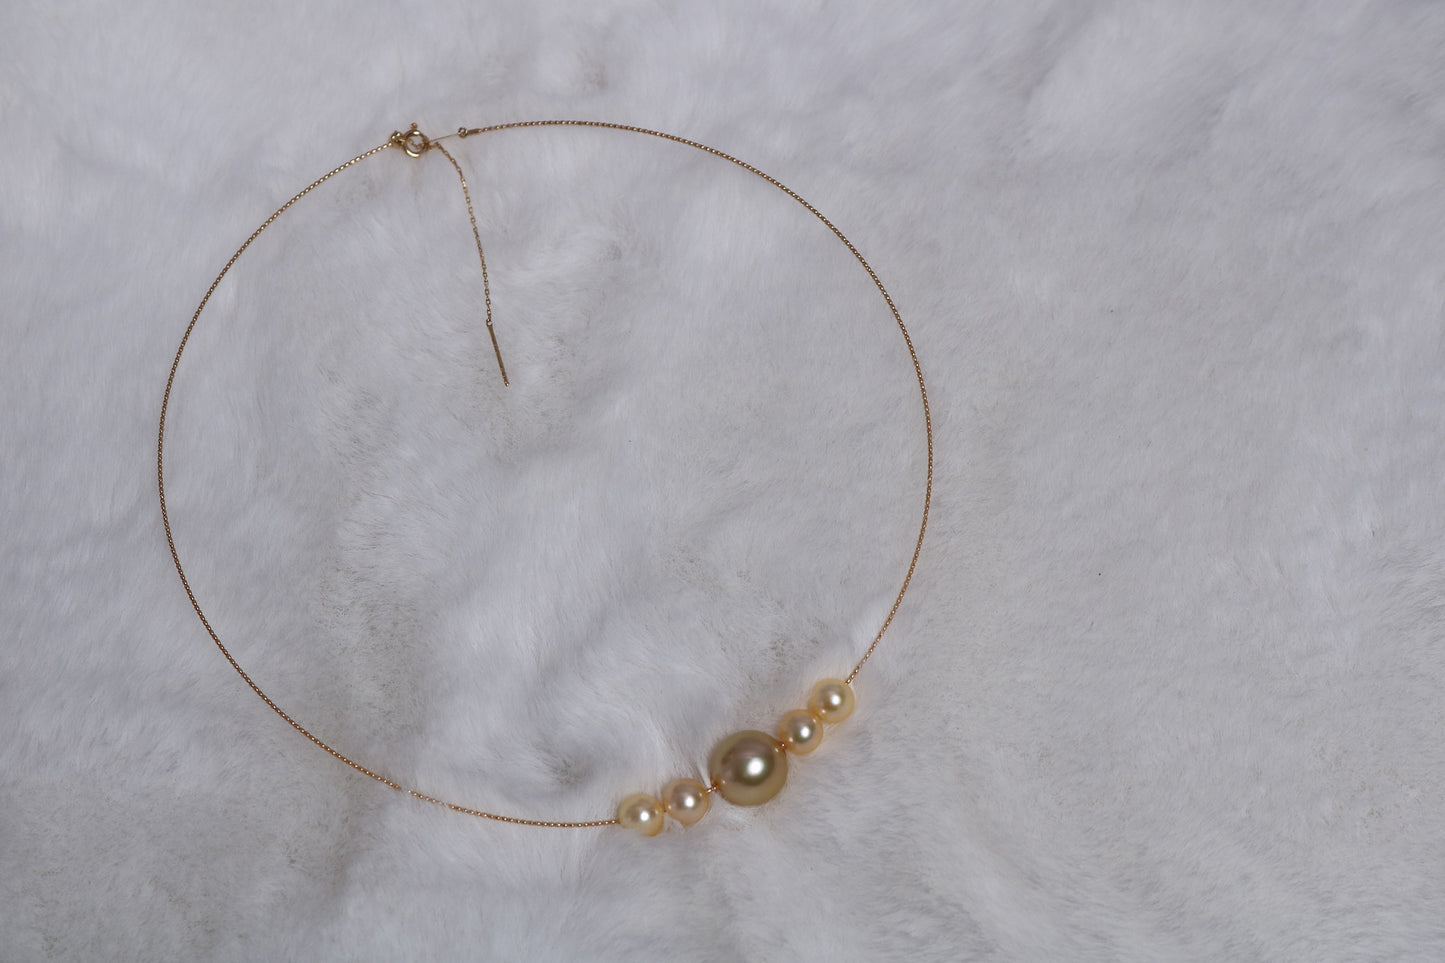 Golden South Sea Pearl and Golden Japanese Akoya Pearl Necklace